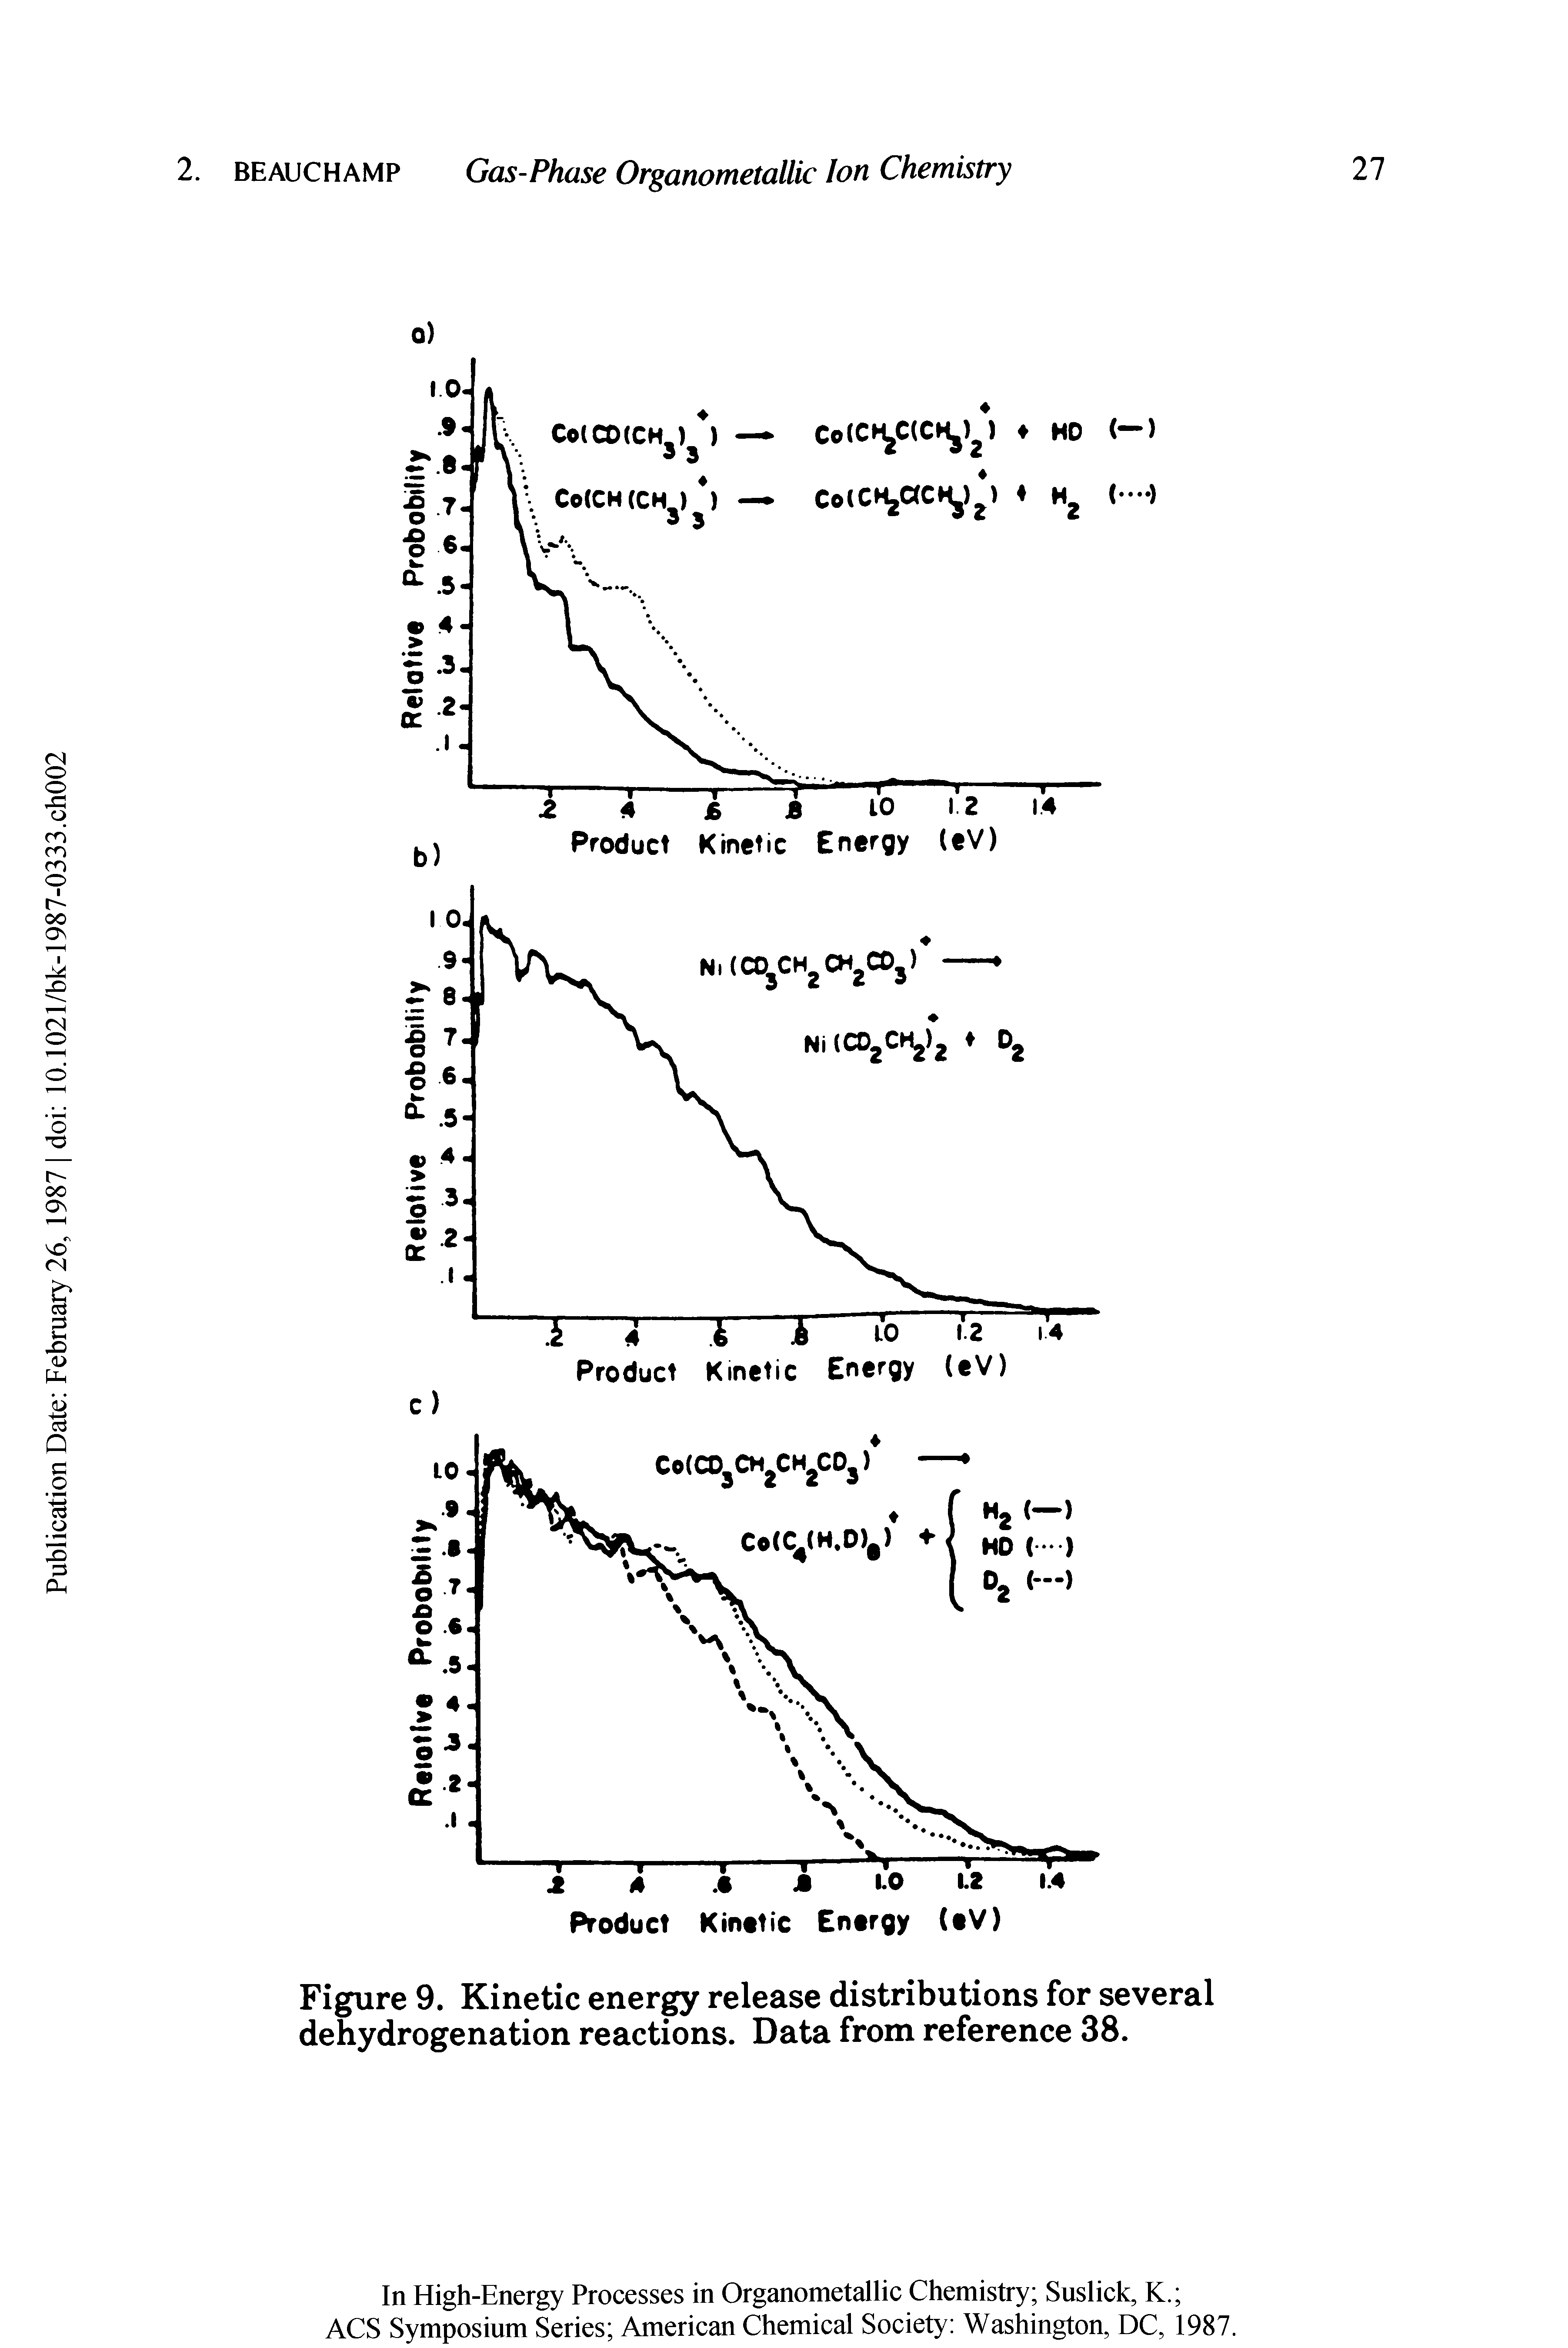 Figure 9. Kinetic energy release distributions for several dehydrogenation reactions. Data from reference 38.